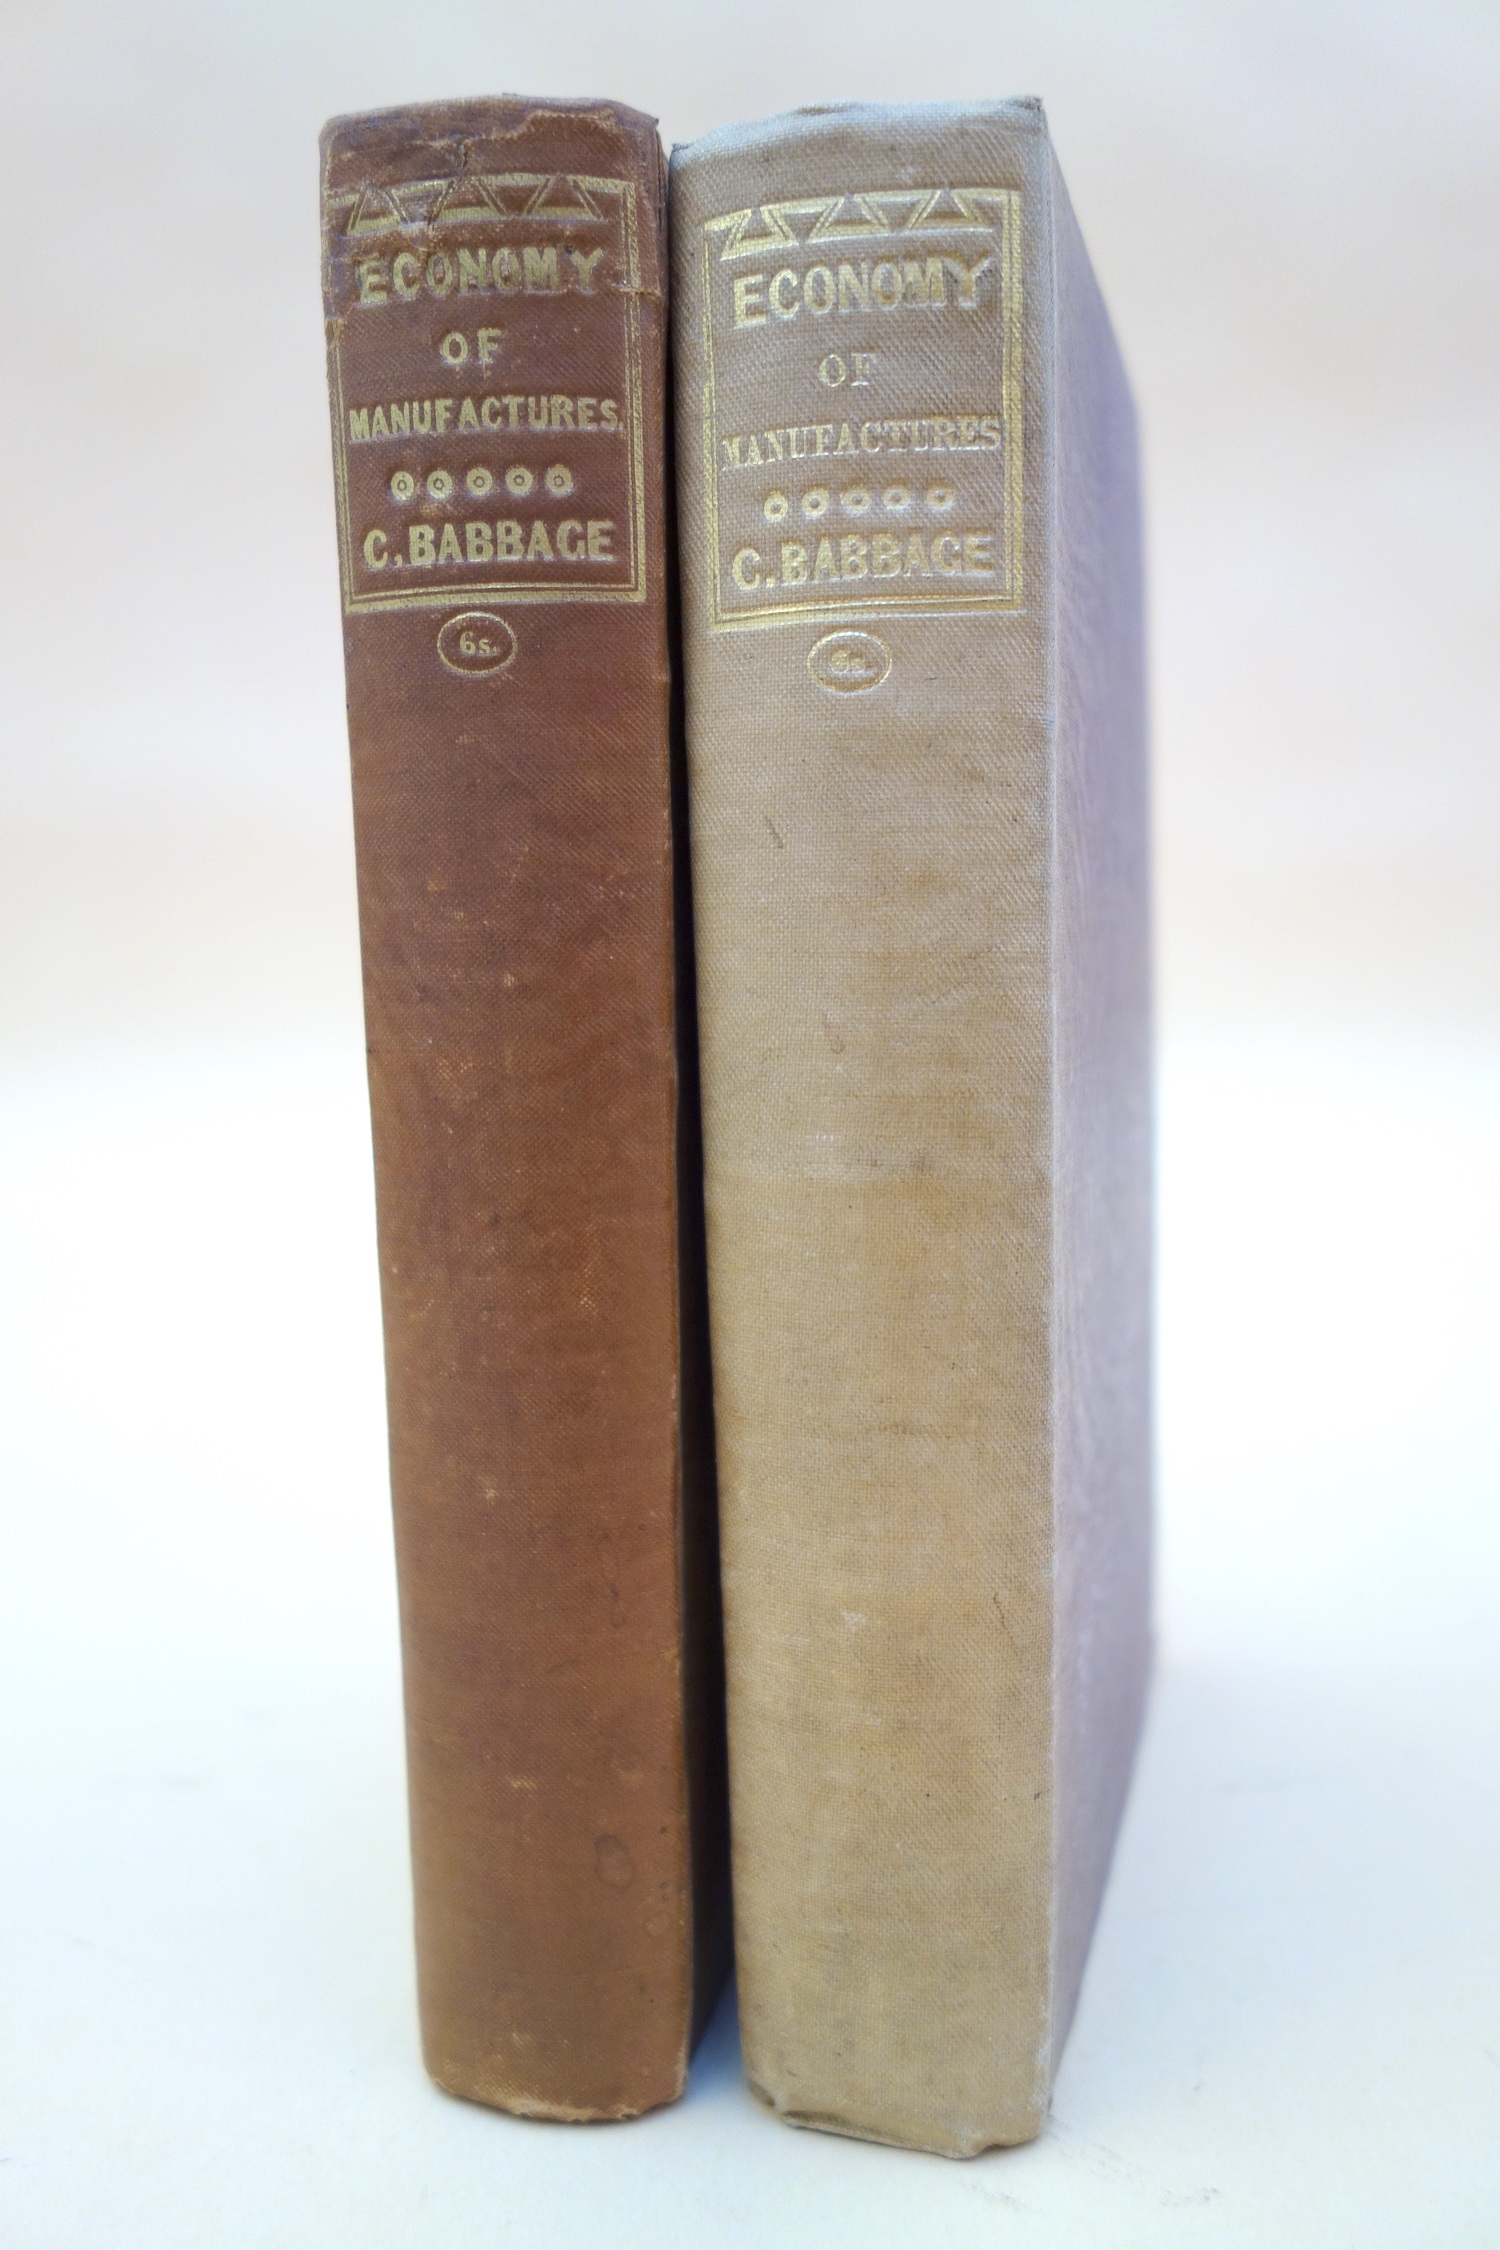 The decorated spines of the first and third editions of Babbage